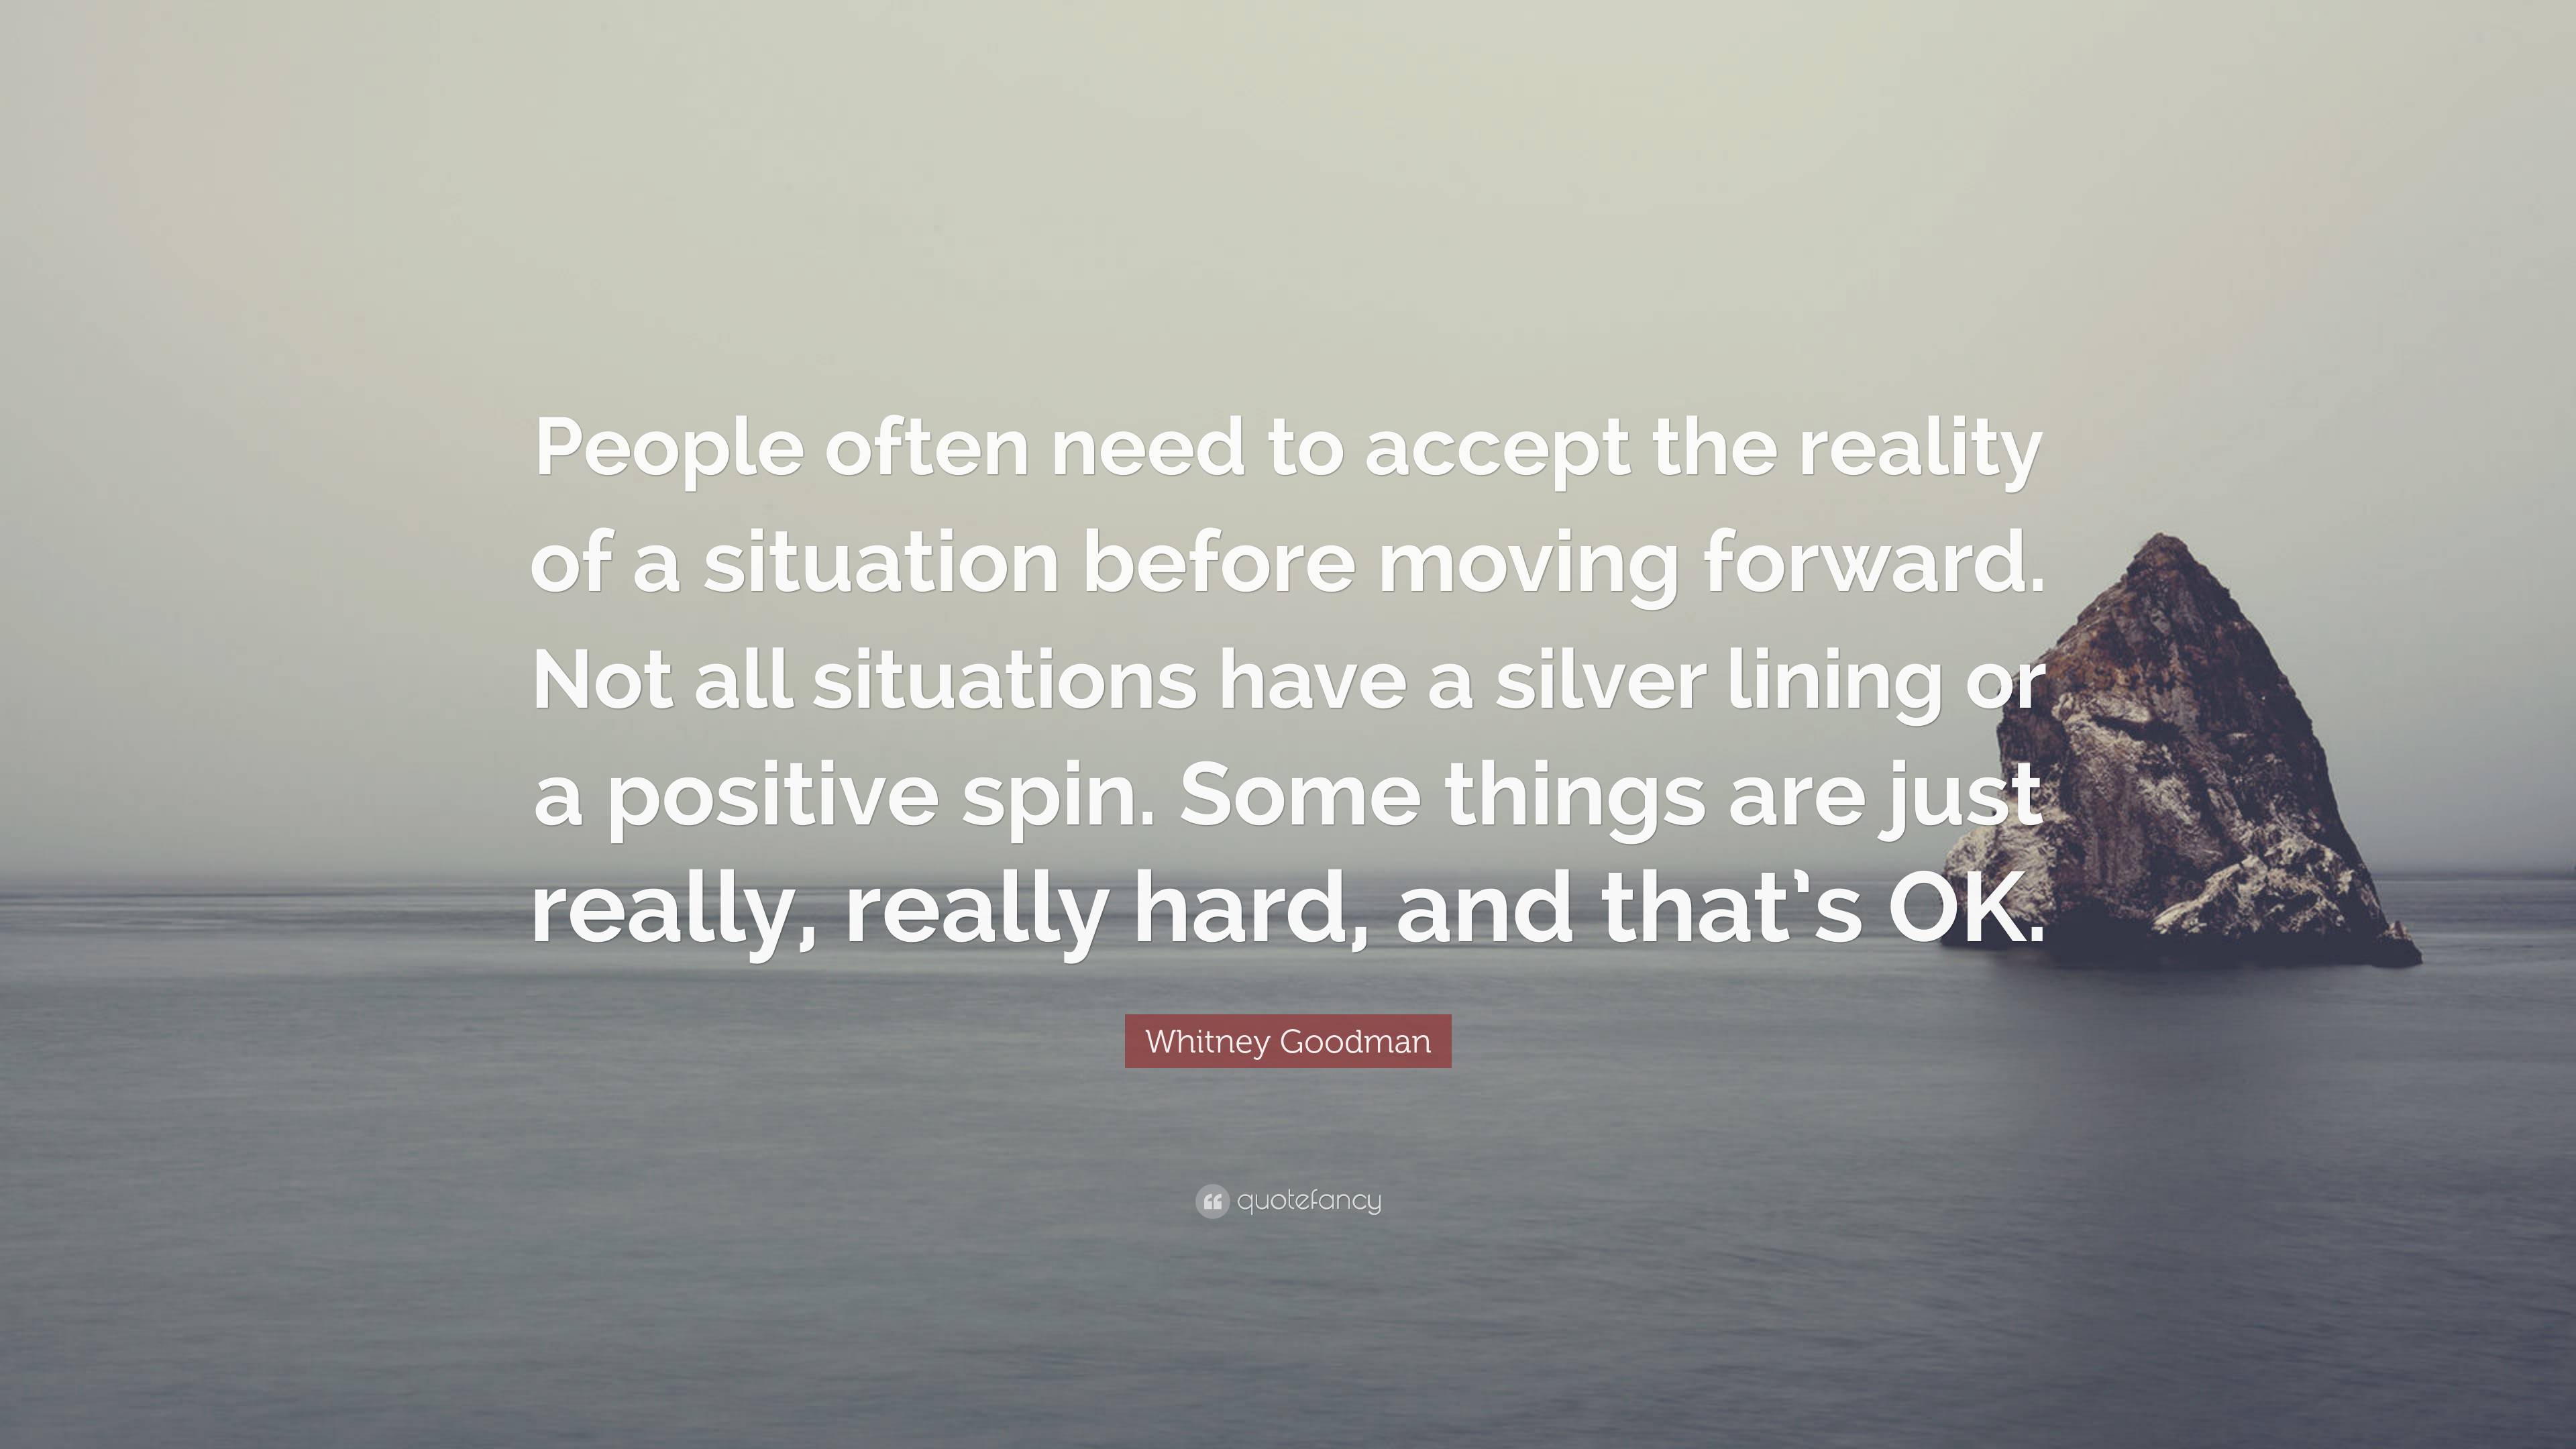 Whitney Goodman Quote: “People often need to accept the reality of a ...